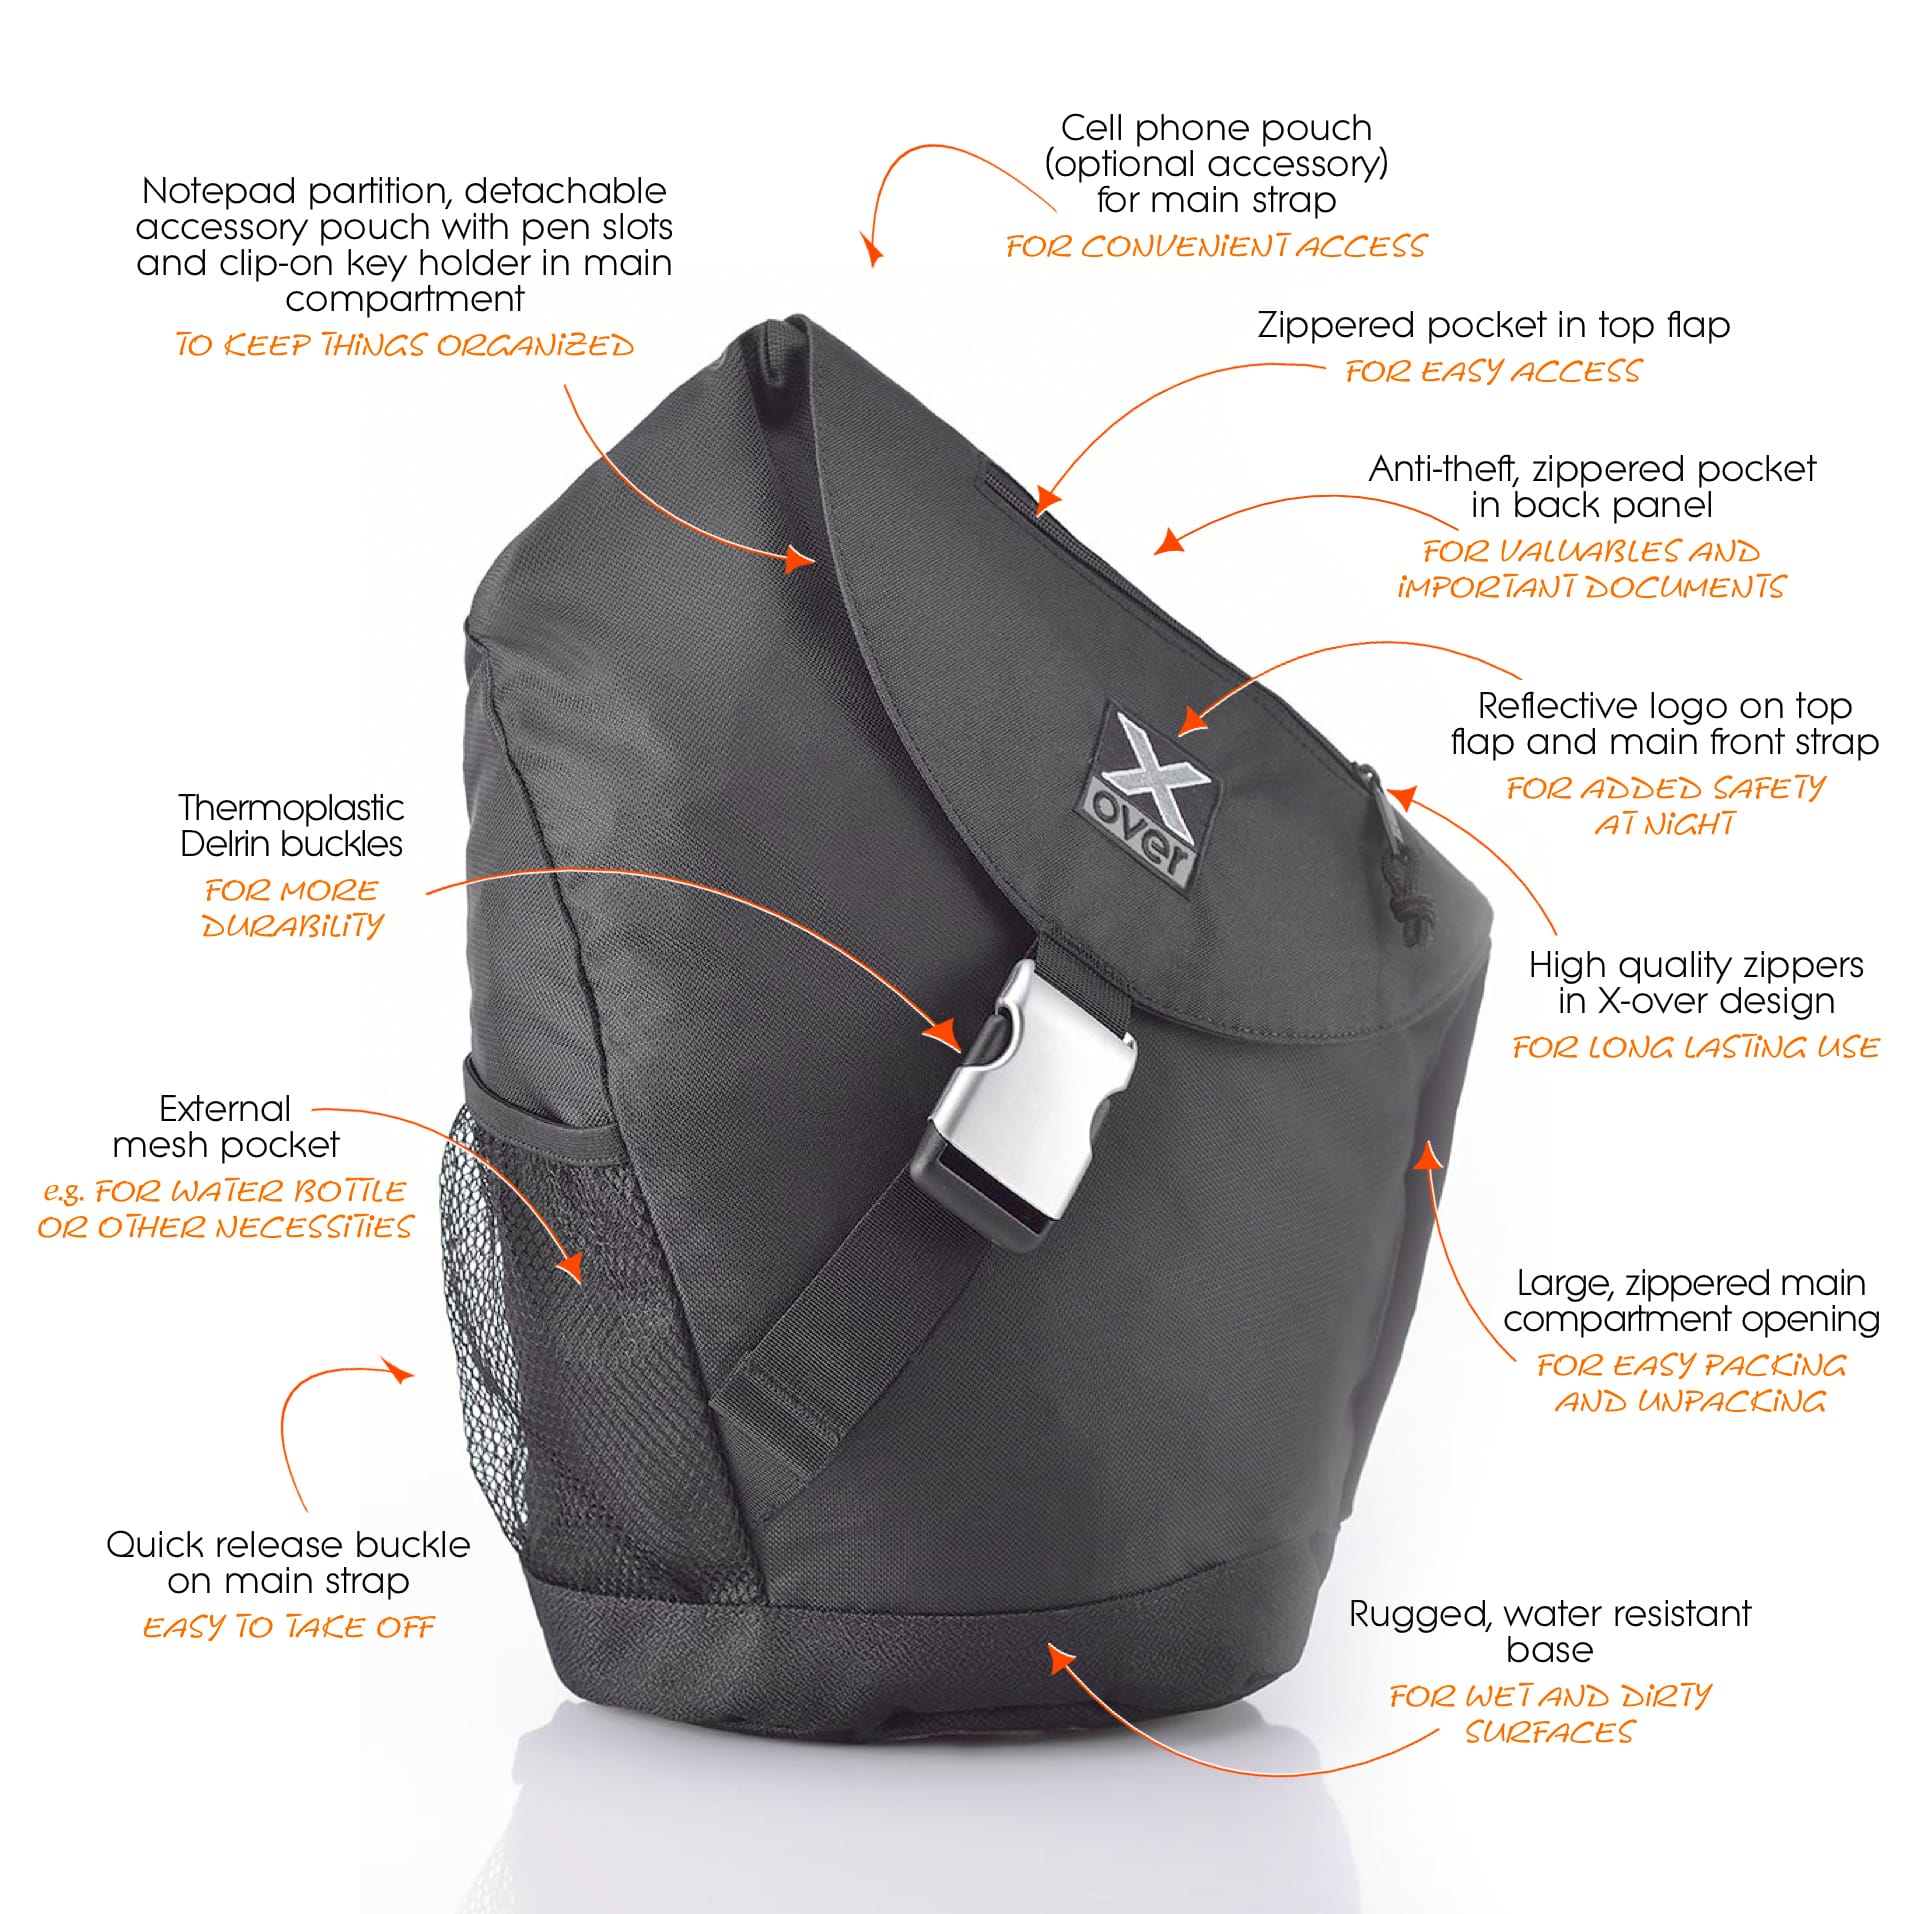 Graphic showing all the features of the X-over Barcelona bag